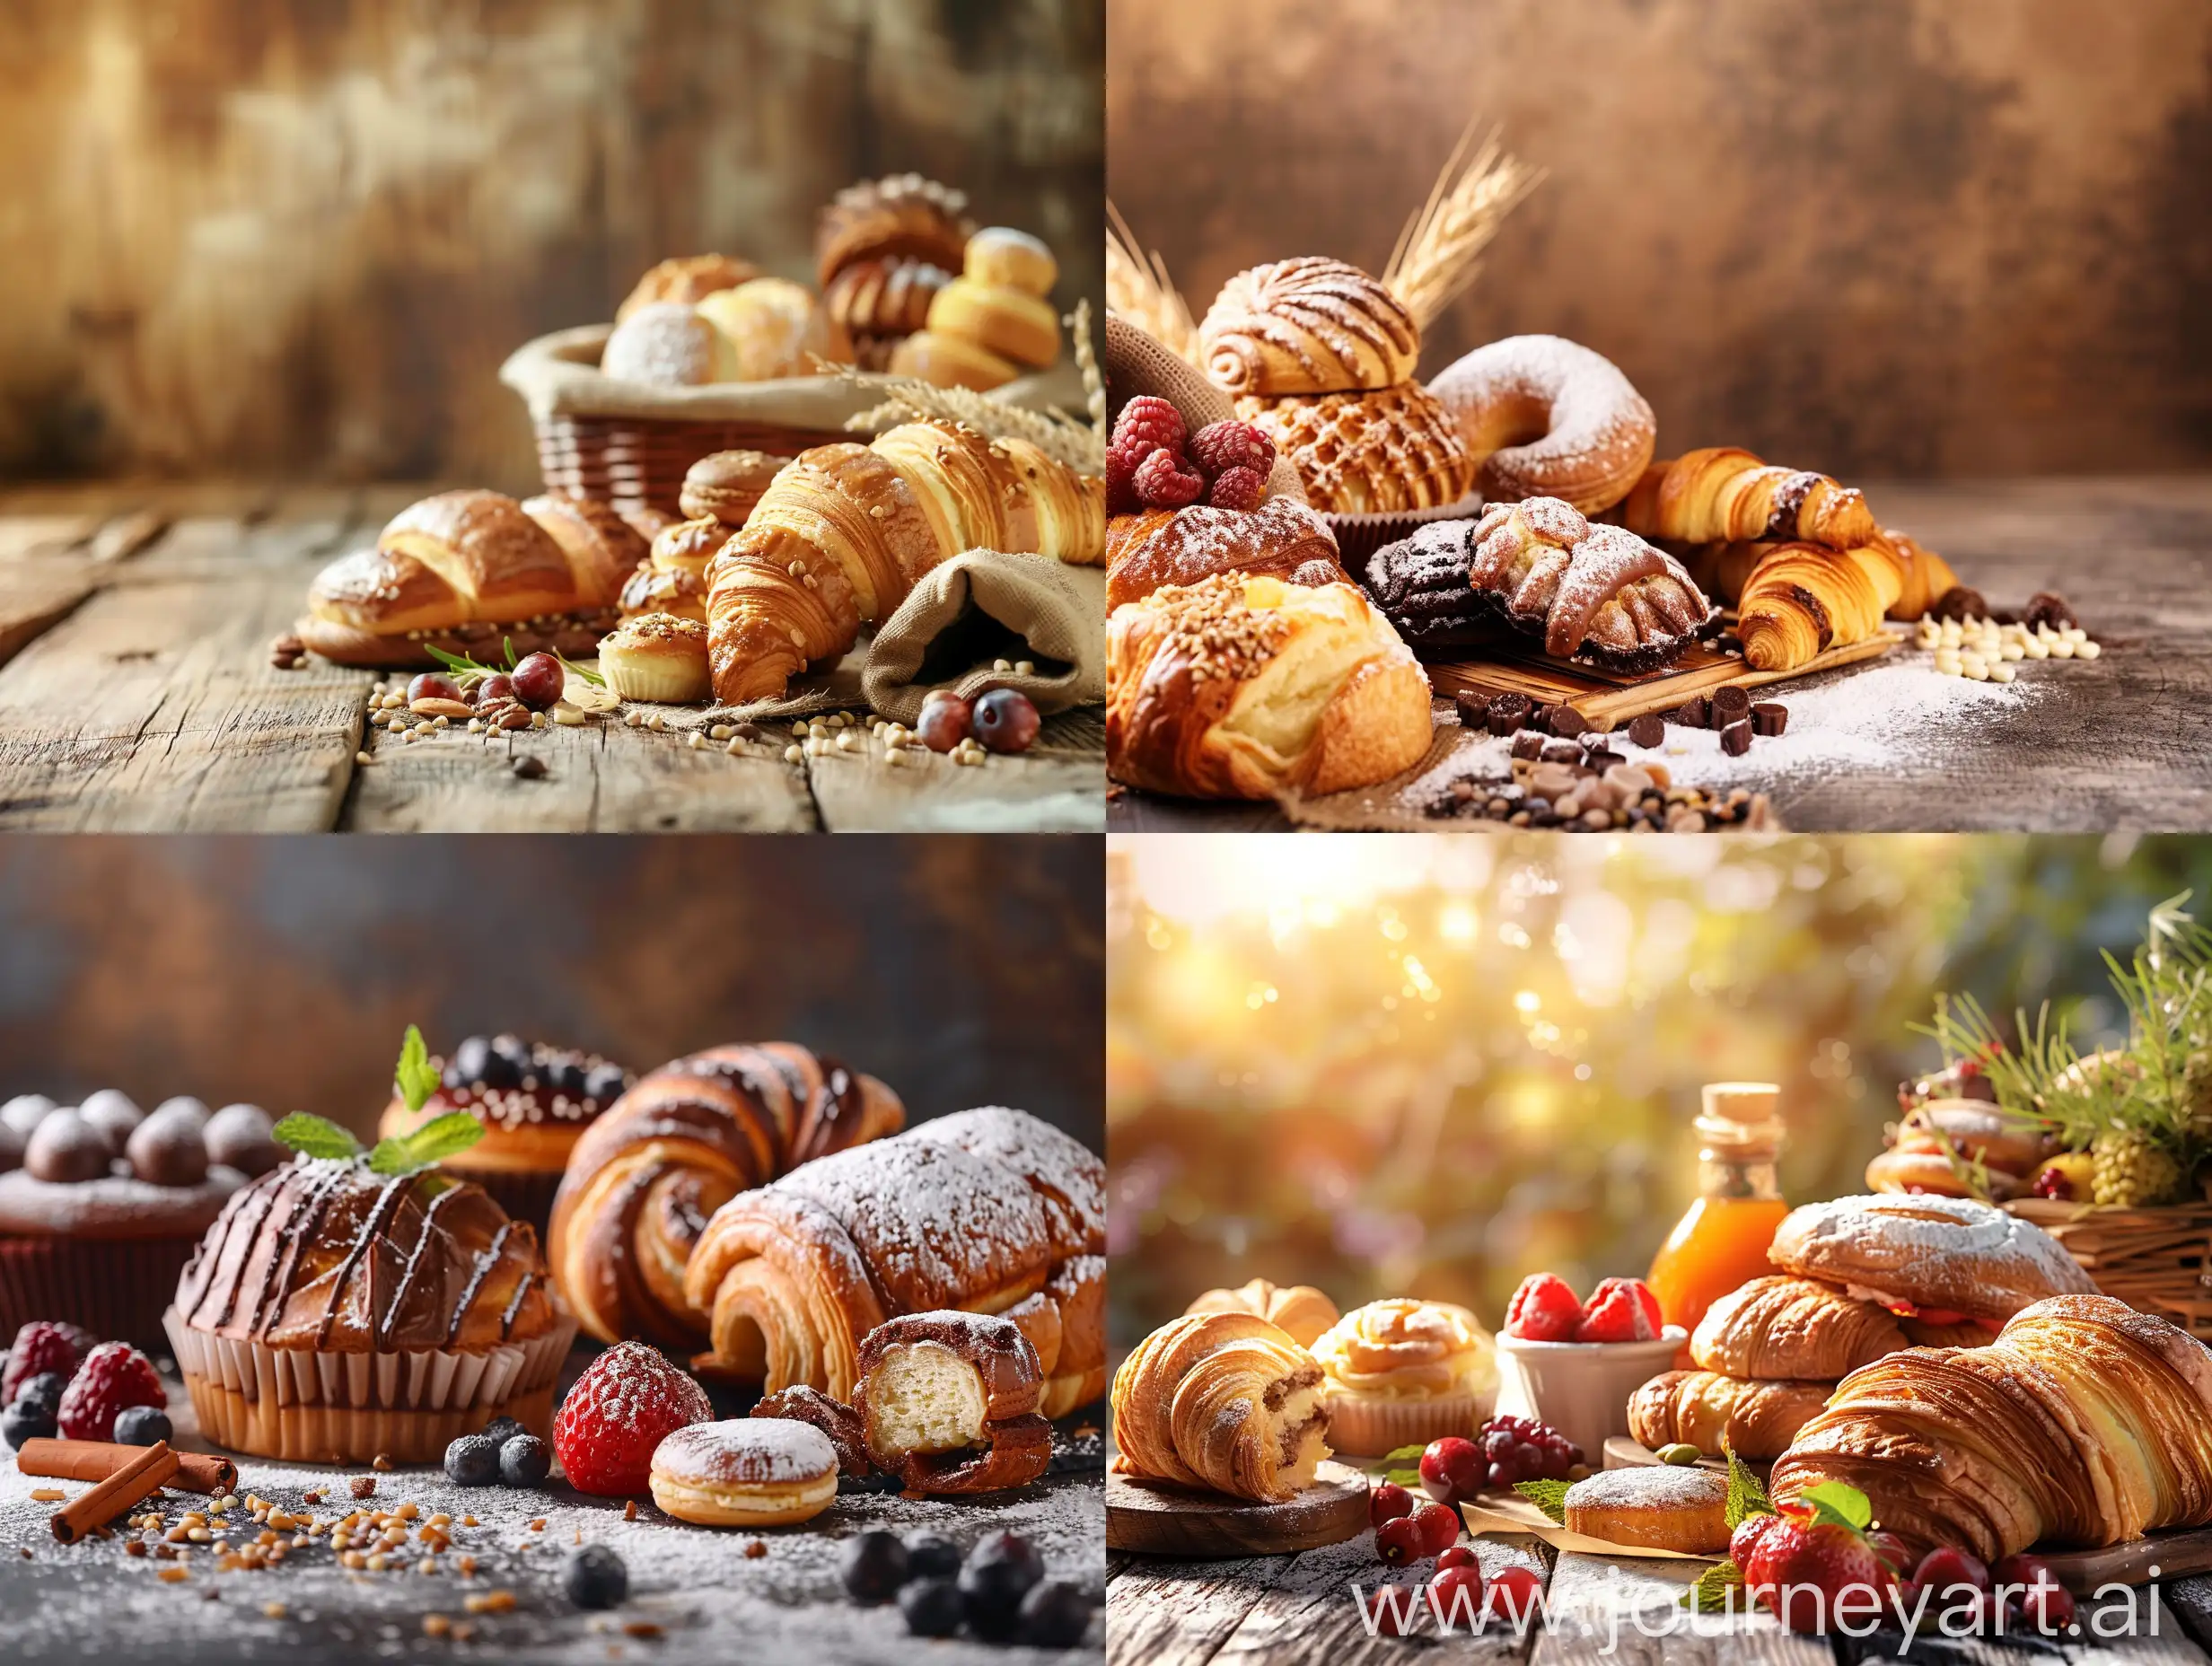 **show a beautiful background with delicious pastries for the presentation of a company selling a bakery franchise 